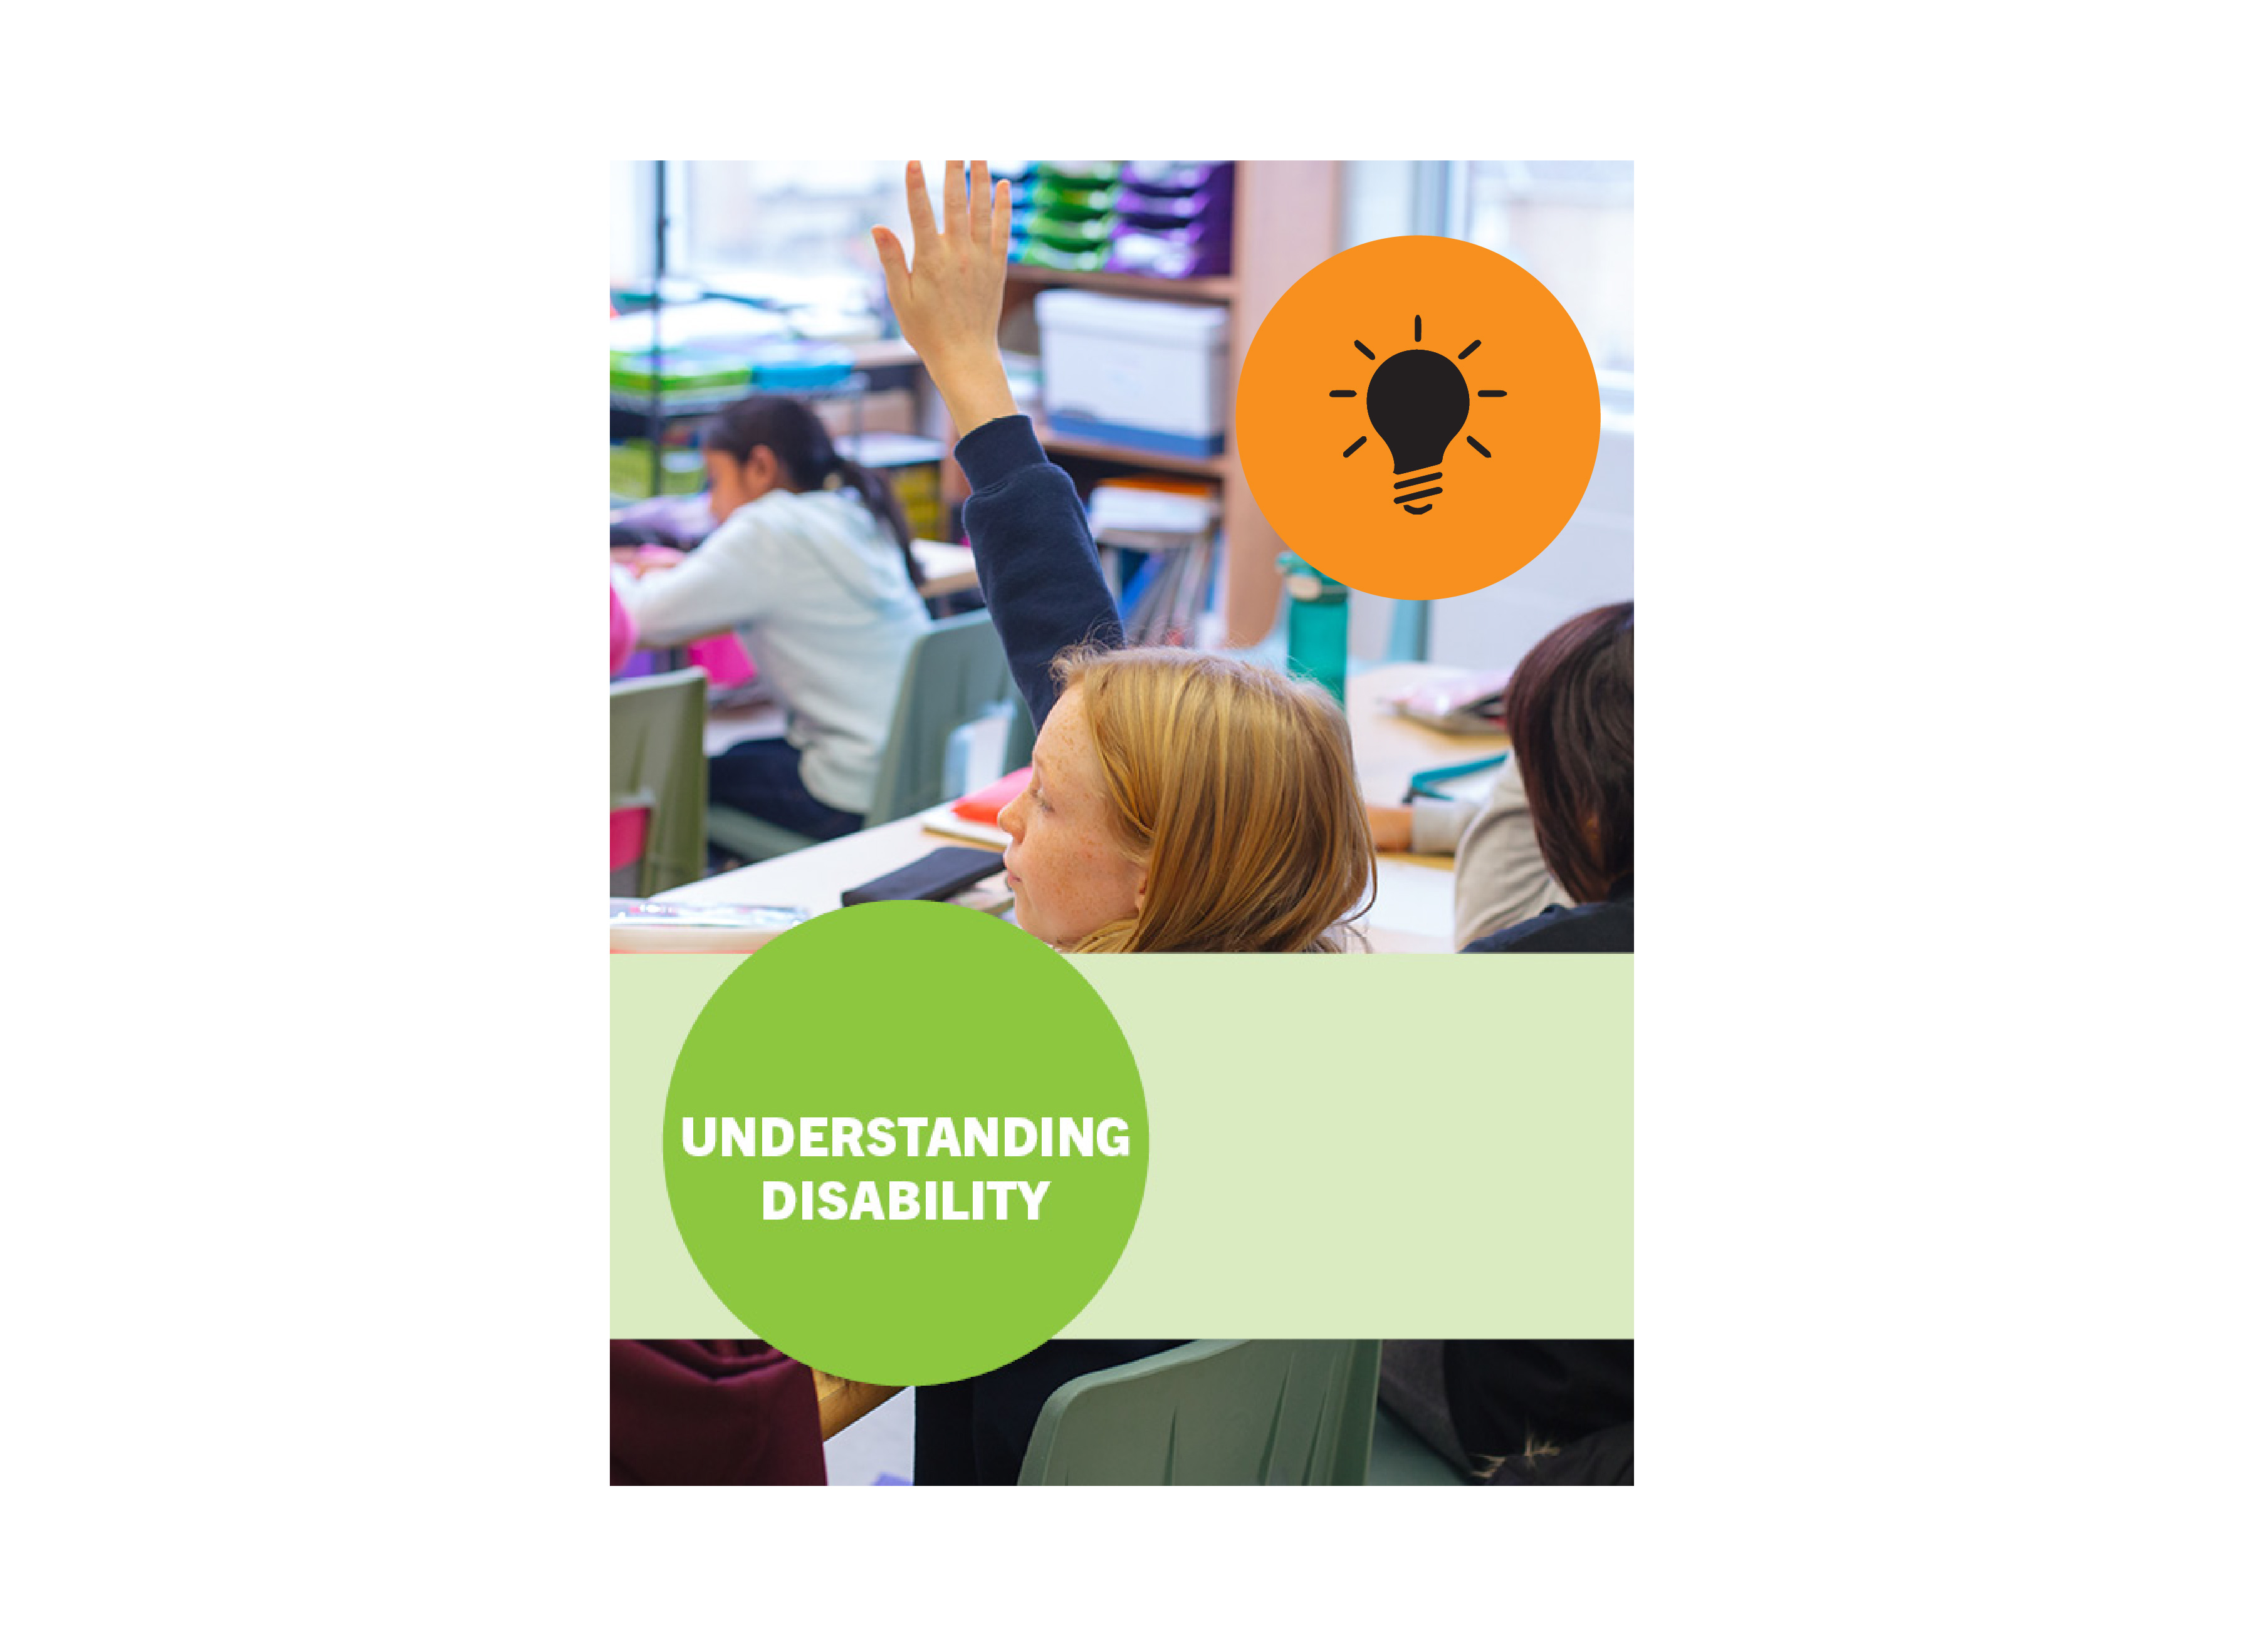 Girl with dirty blonde hair raising her hand in class. Title text is "Understanding Disability"